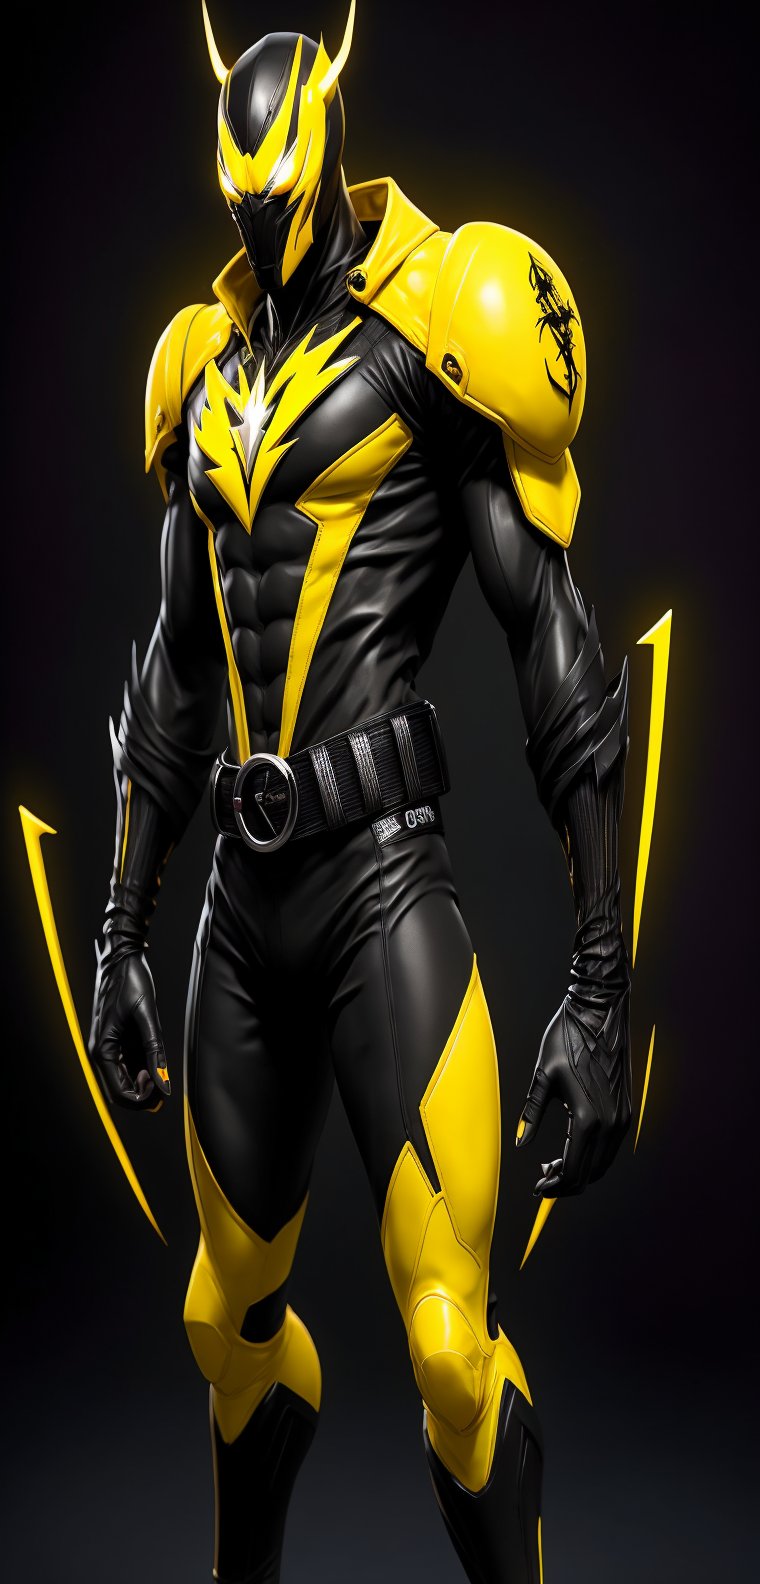 A speedster hero, with an imposing presence and athletic figure, stands in a ready-to-run stance. His suit is a vibrant mix of yellow and black, designed not only for speed but also protection and style. This hero, known as "Black Lightning", embodies the essence of speed and justice.
Mask: A tight-fitting mask covers your face, exposing only your eyes, nose, and mouth. The mask is black with yellow details around the eyes, forming a streamlined design that accentuates his penetrating and determined gaze.

Emblem: In the center of his chest, a stylized yellow lightning bolt emblem stands out against the black background of the suit. This emblem is the symbol of his heroic identity and his ability to move at superhuman speeds.

Upper: The upper part of the suit is primarily yellow with black details on the shoulders, arms and sides, providing a dynamic contrast that reflects his energy and speed. The suit's material is light but strong, designed to withstand the friction and heat generated by its rapid mobility.

Gloves: His gloves are black with yellow details on the fingers and wrists, providing a firm grip and protecting his hands during his missions.

Belt: A black belt cinched around your waist, with small compartments to hold useful devices and communication tools.

Bottom: The pants of the suit are black with yellow details on the sides, continuing the streamlined design and ensuring flexibility and comfort. The boots, also black with yellow lightning bolts, are designed for maximum traction and durability, with reinforced soles to absorb the impact of your fast runs.
In full motion, Black Lightning is a blurry figure to the human eye. The energy of their movements is perceived as flashes of yellow light and black shadows that mark their path. His speed is amazing, capable of overcoming any obstacle in the blink of an eye. The speed lines that follow him highlight his ability to move through time and space with unmatched precision.